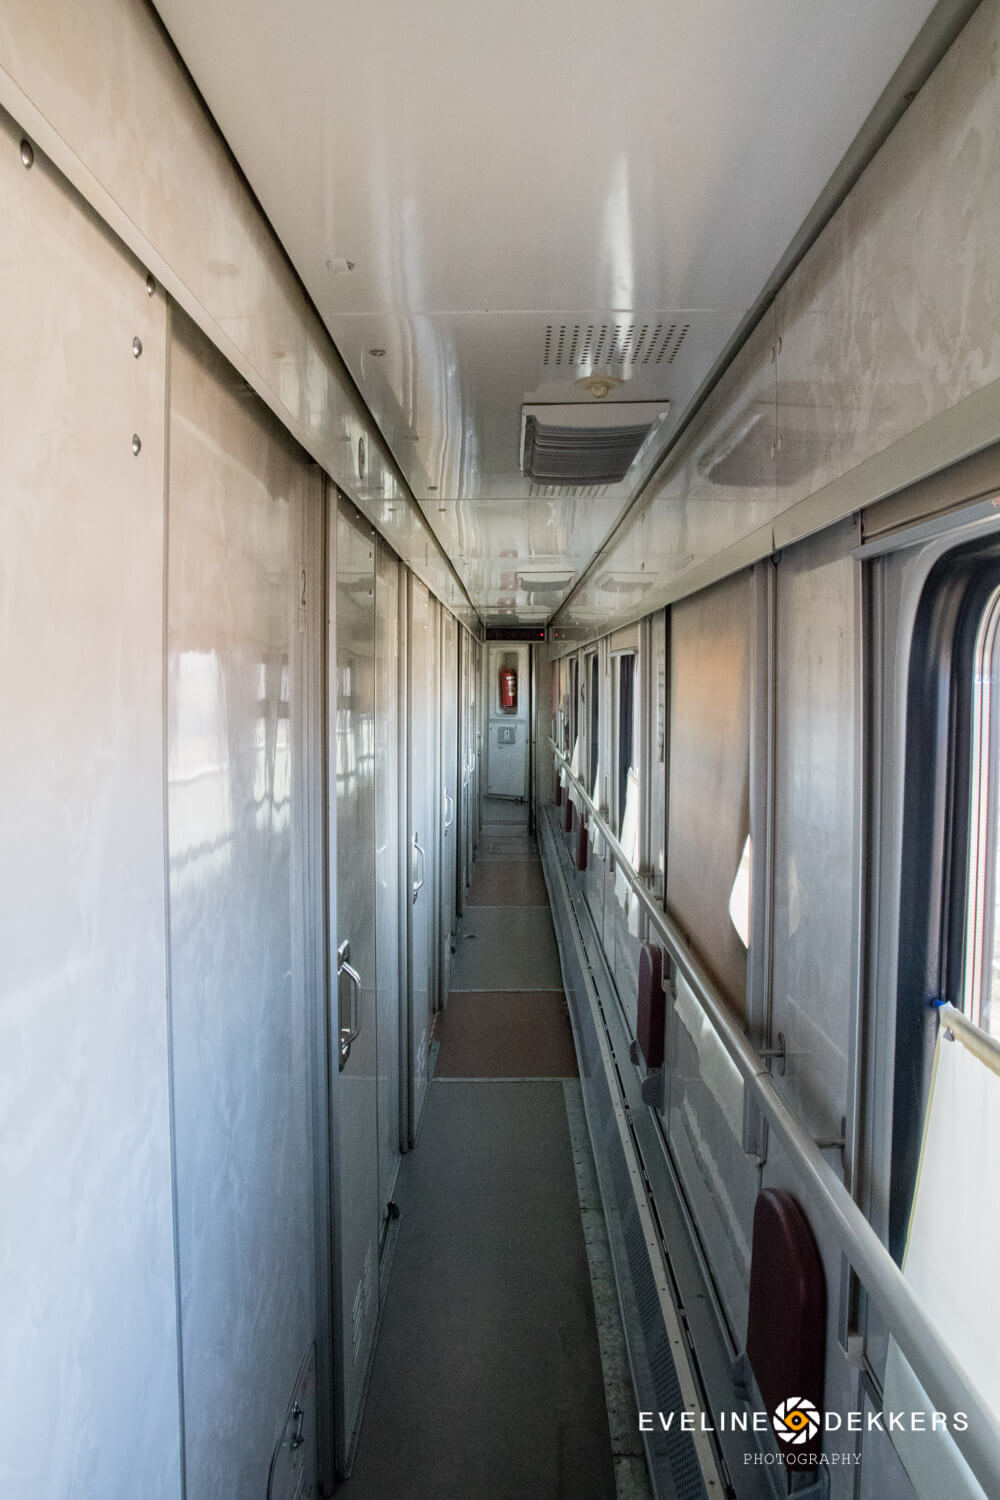 Example of the hallway in a Russia train